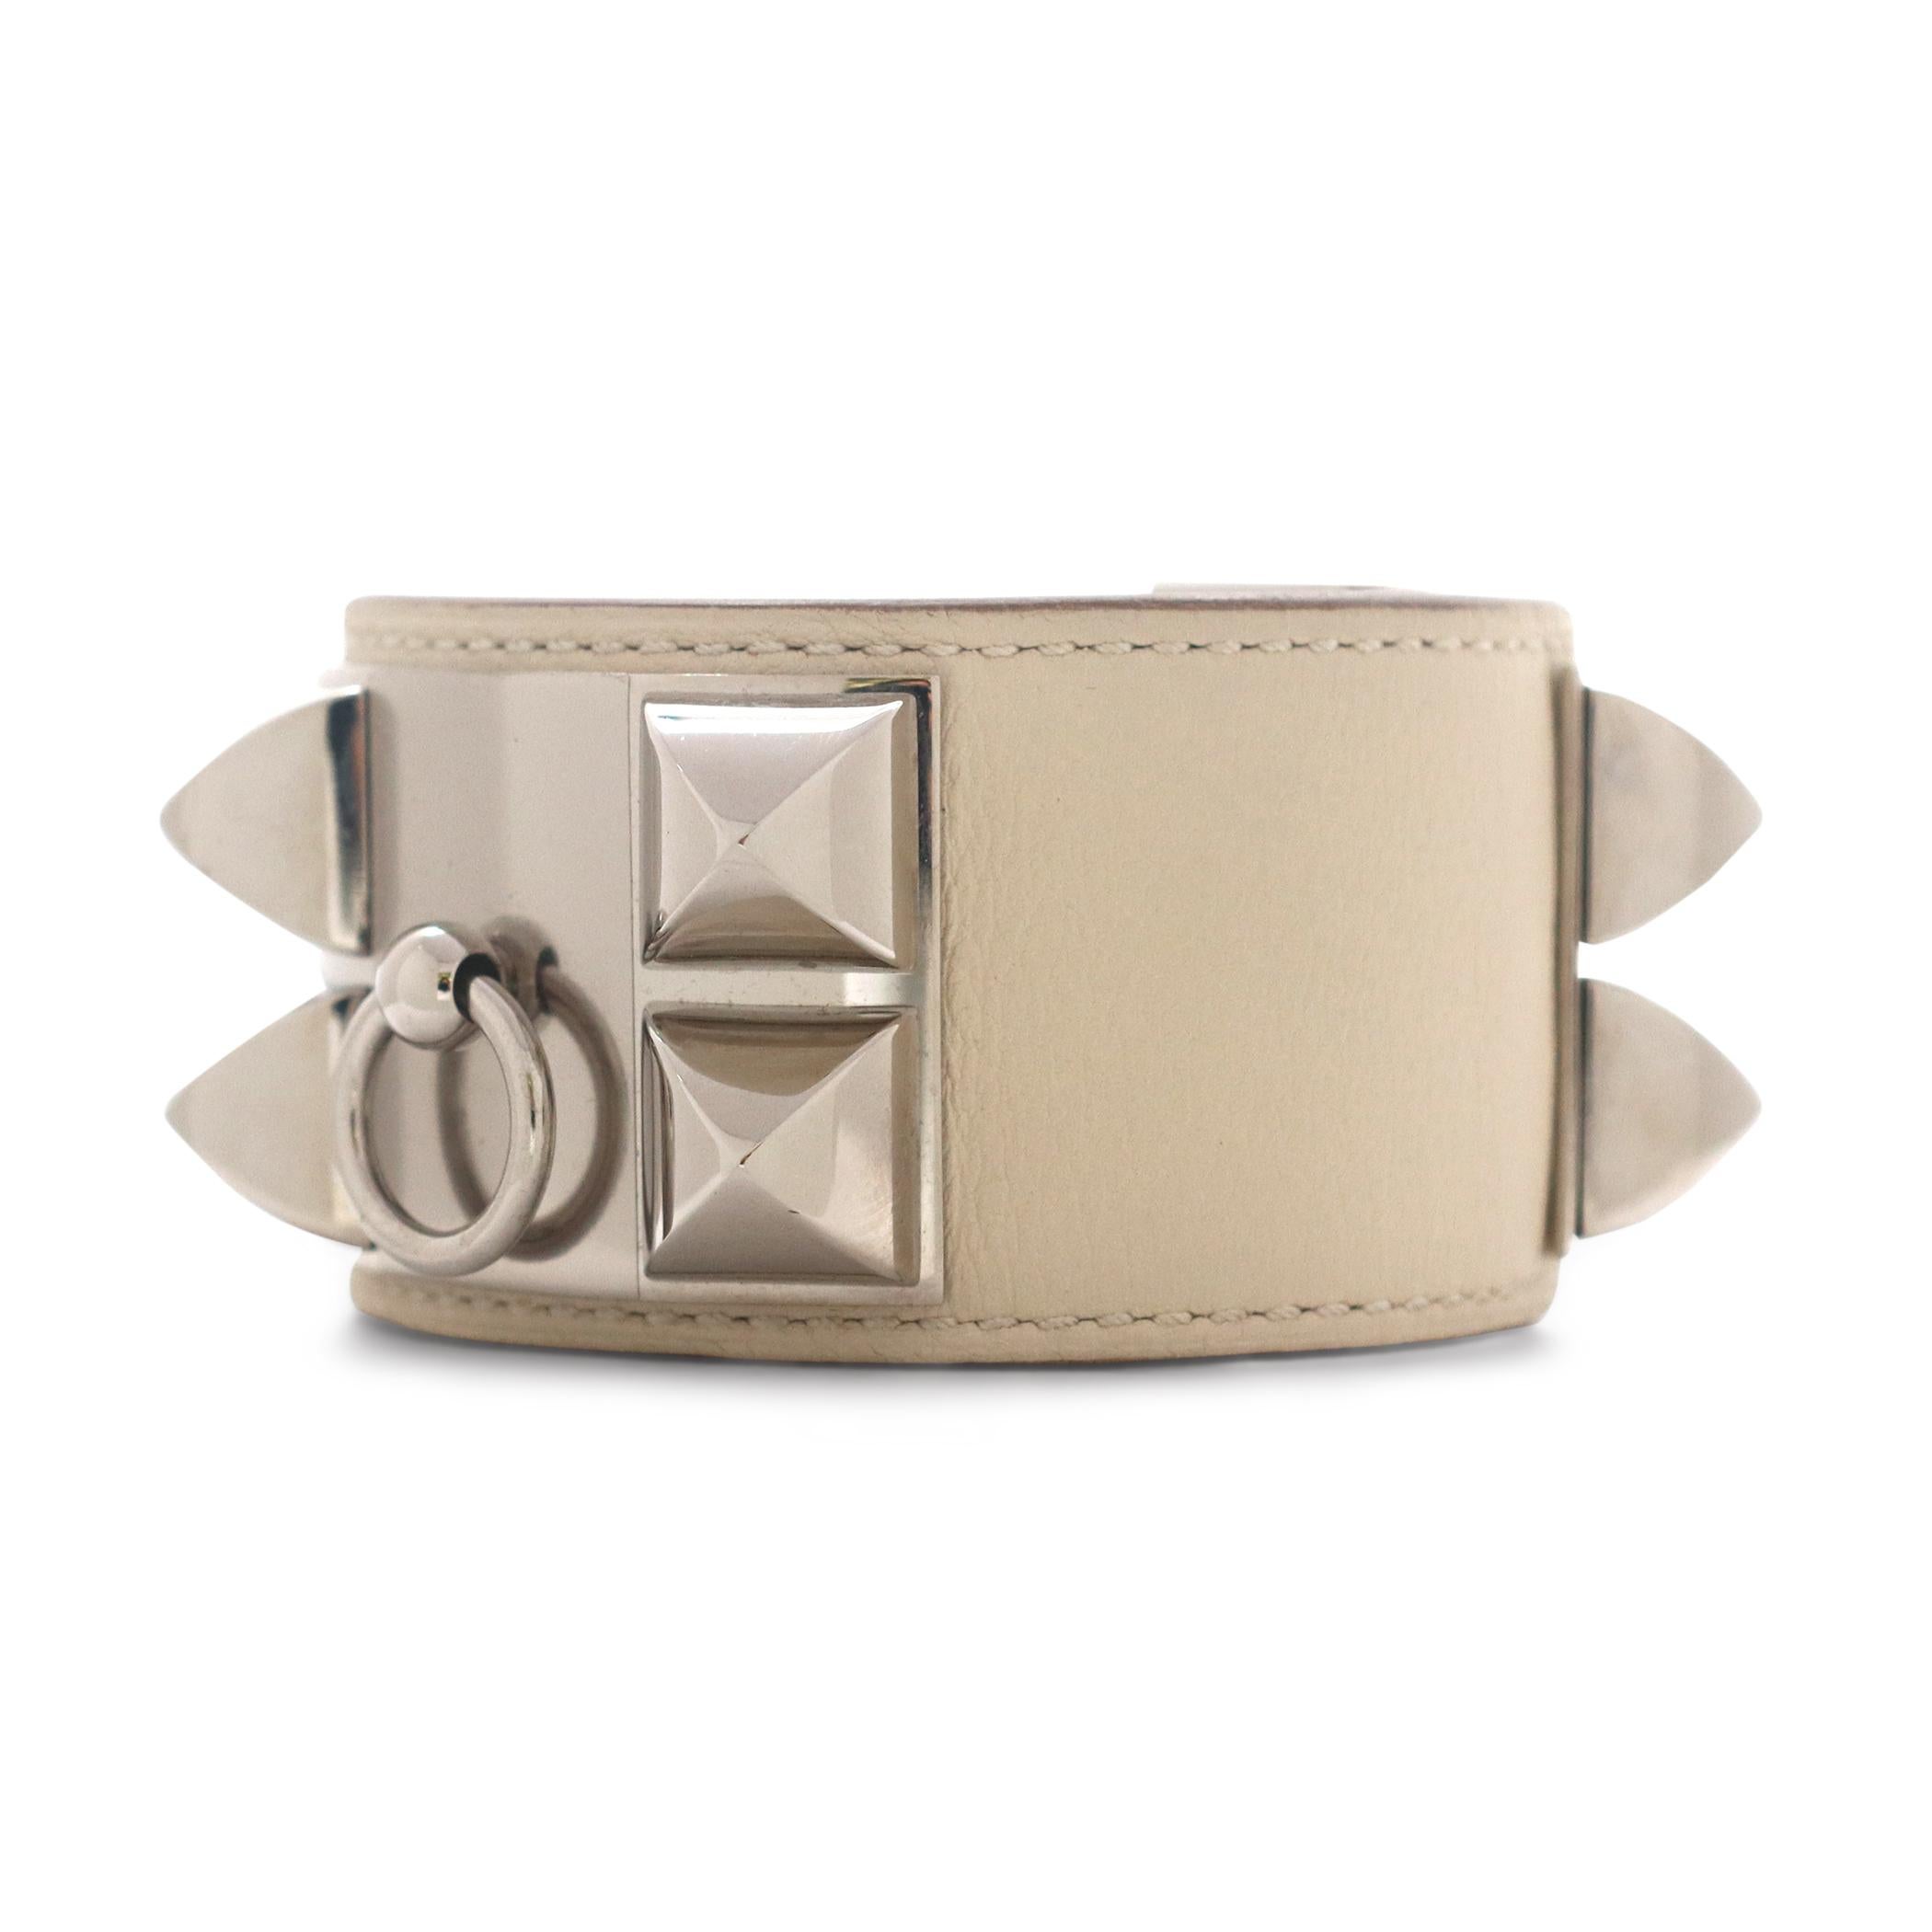 Authentic Hermès 'Collier de Chien' bracelet crafted in white calfskin leather with palladium plated hardware. Size large with an adjustable closure that can fit up to a 7 inch wrist. The hardware and interior leather show some minor signs of wear